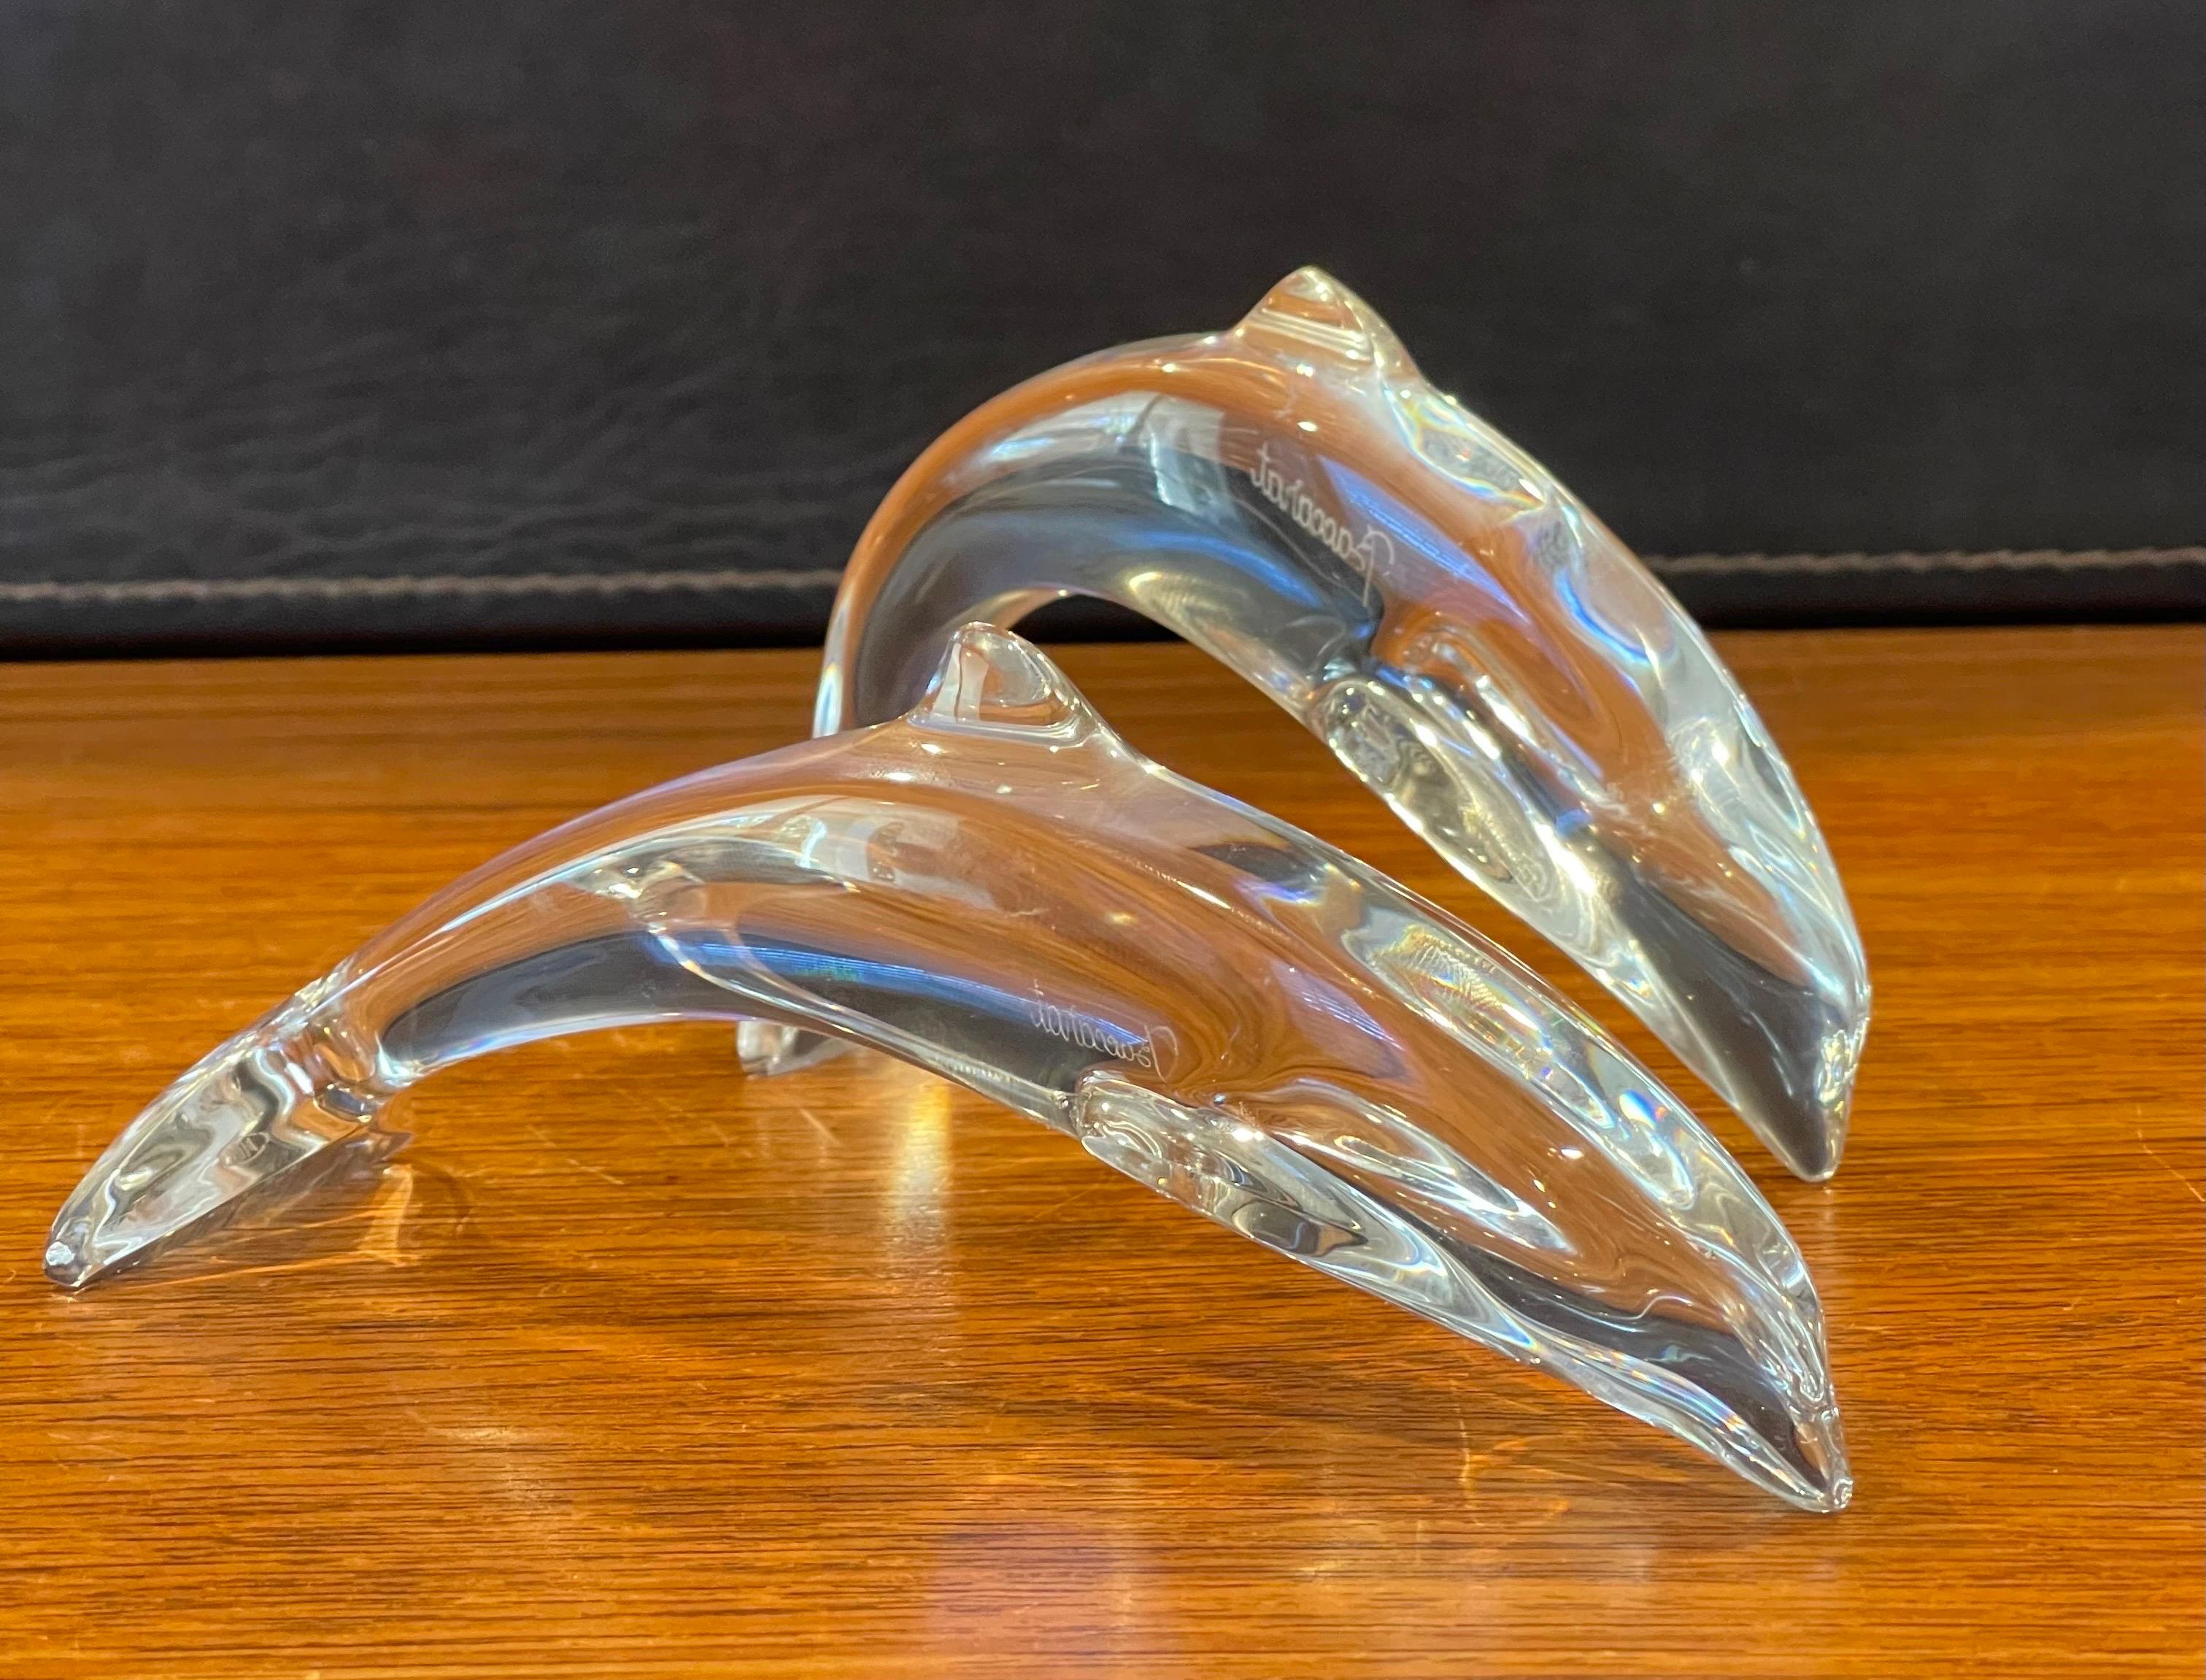 Gorgeous pair of stylized crystal dolphin sculptures / paperweights by Baccarat, circa 1990s. The set is in very good vintage condition with no visible imperfections and great clarity. Signed on the side, the pieces measure approximately 6.5